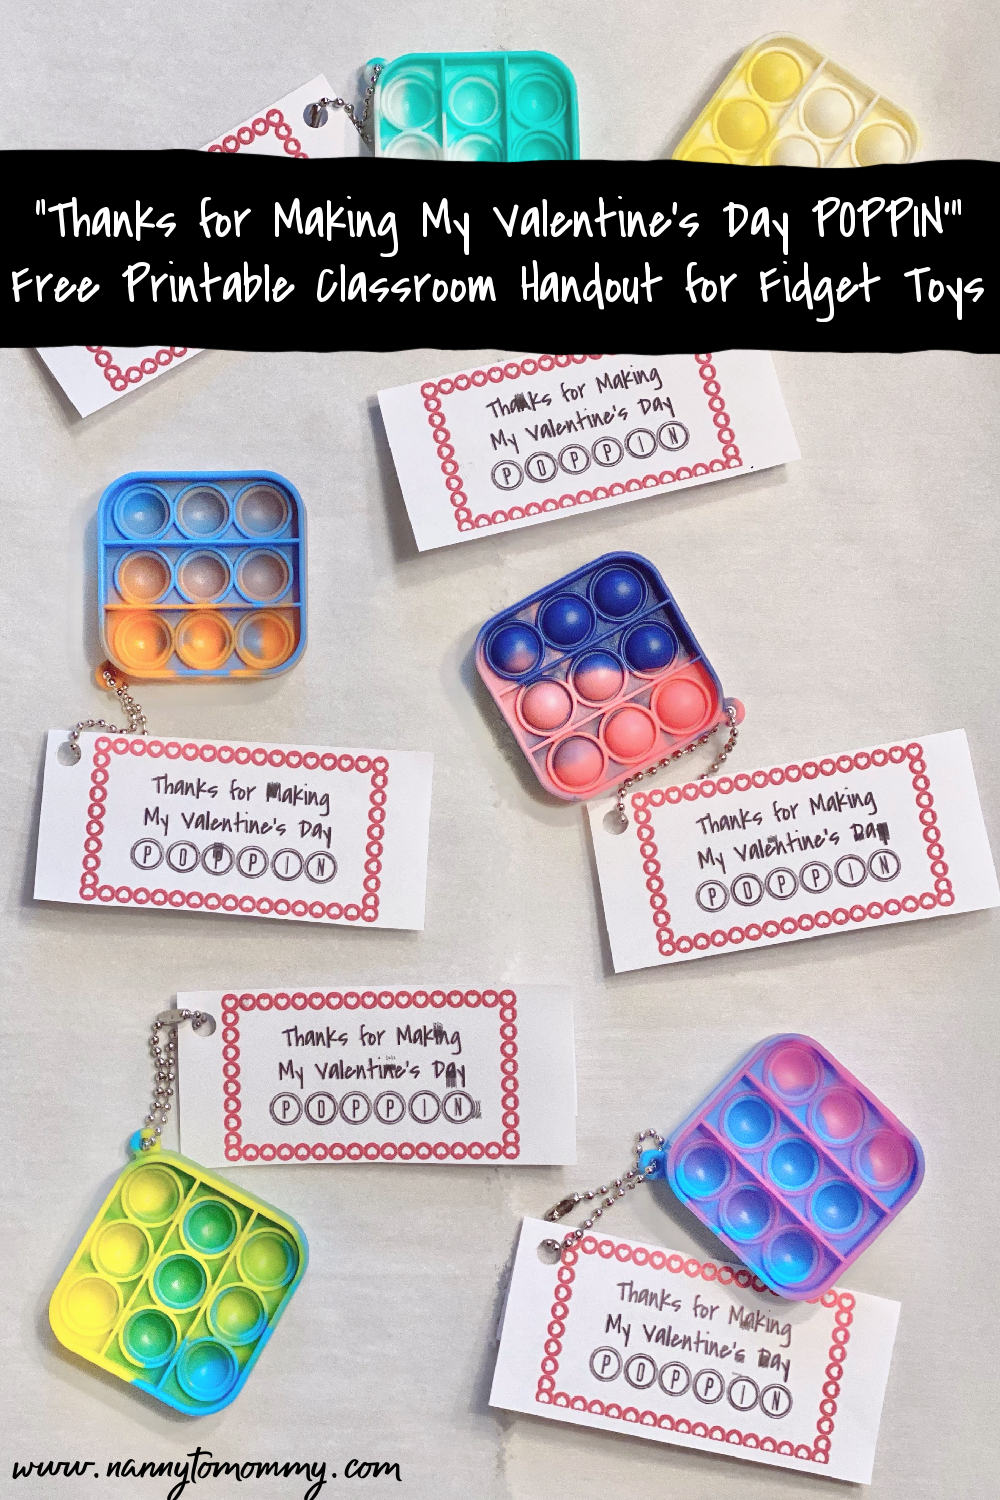 Thanks for Making My Valentine's Day POPPIN' {Free Printable Classroom Handout for Fidget Toys}